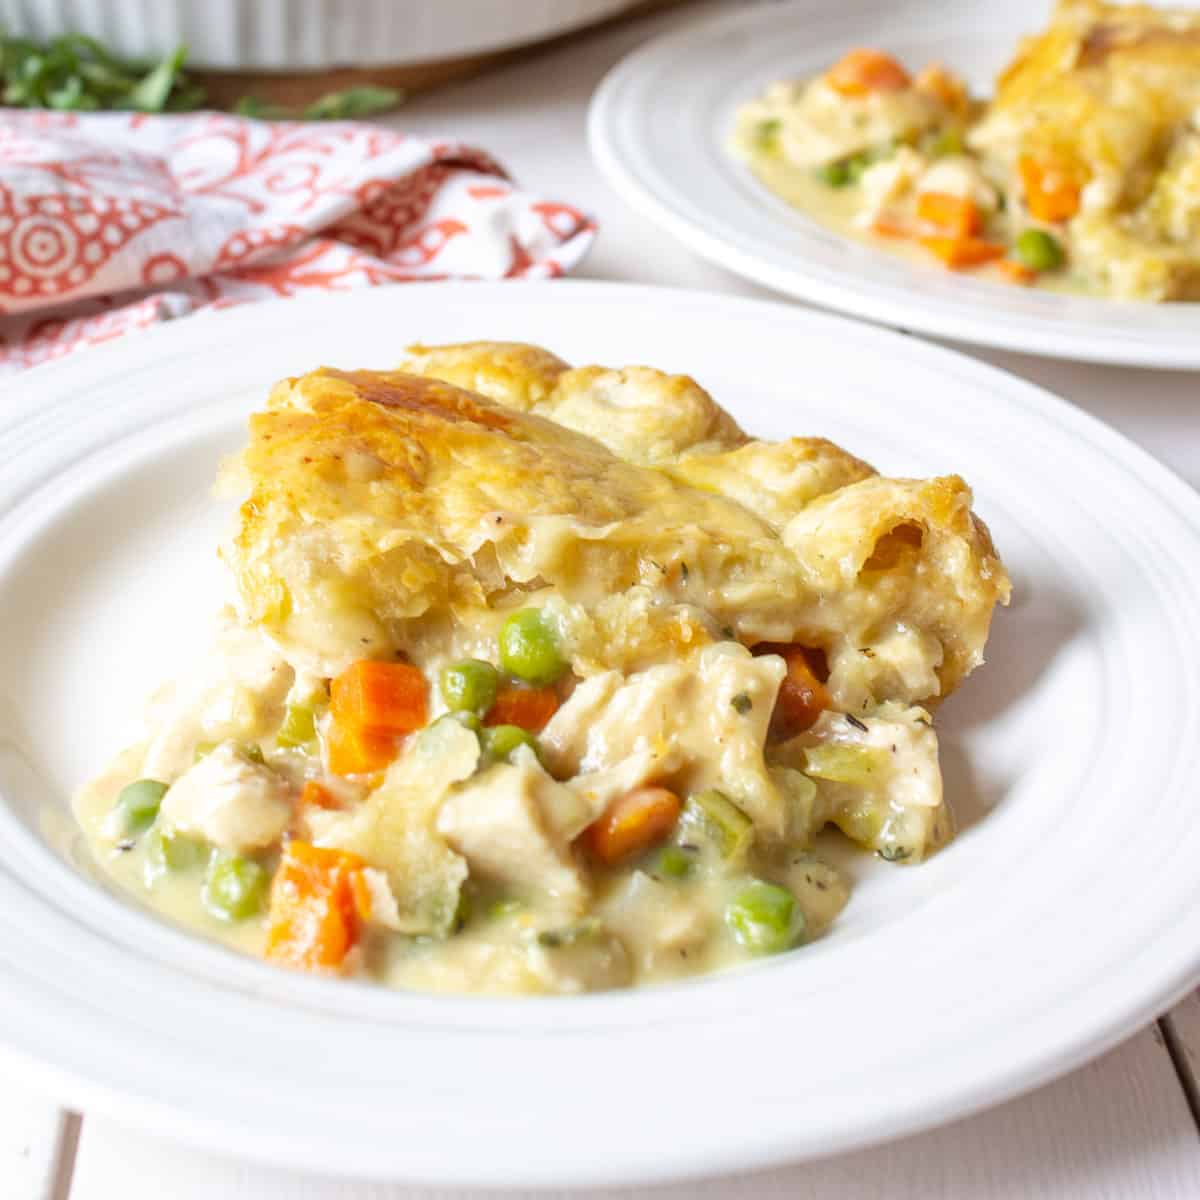 A serving of chicken pot pie on a small white plate.